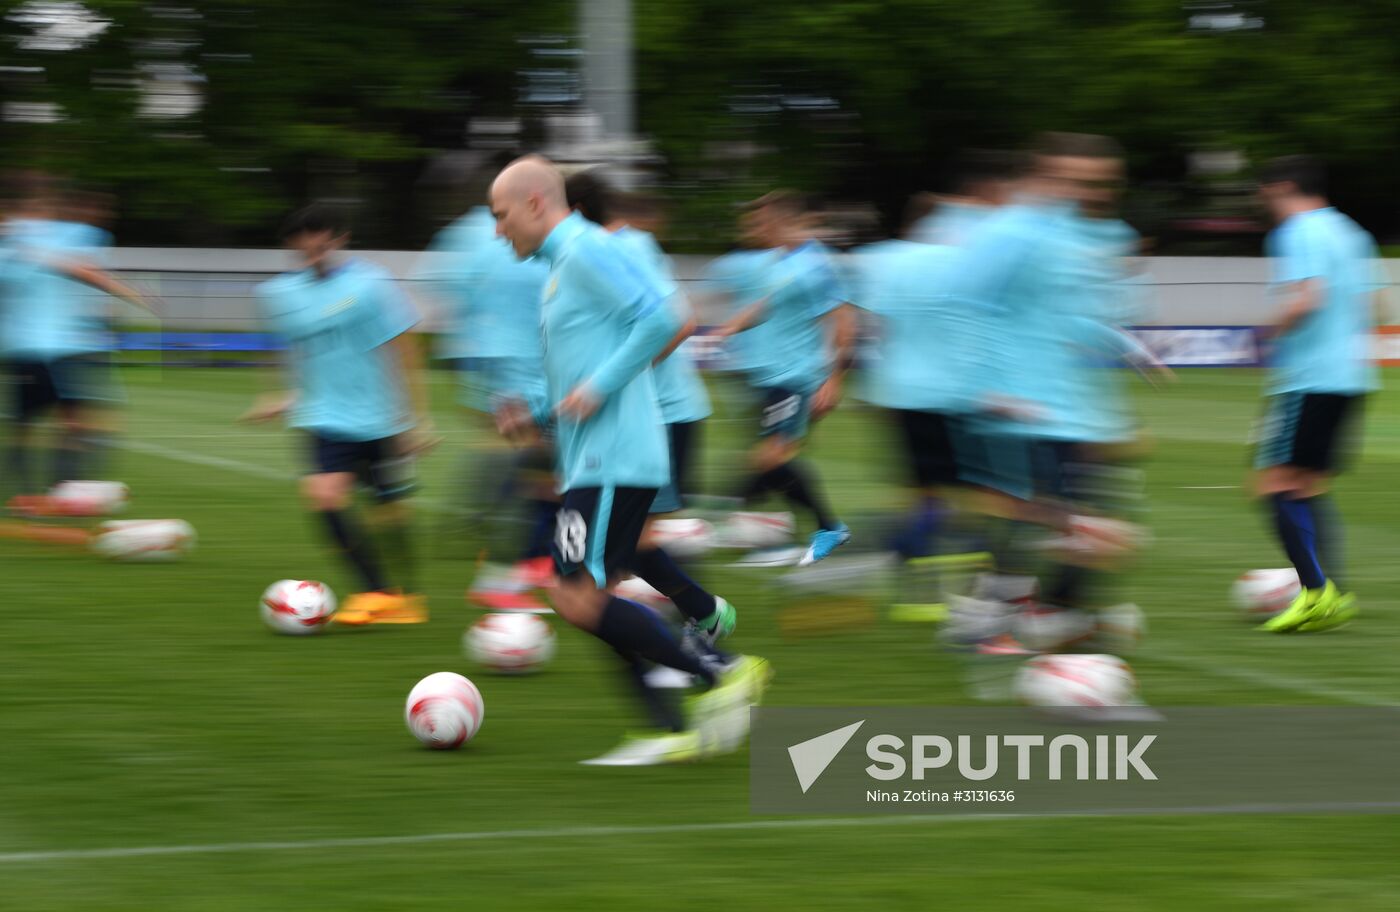 2017 Confederations Cup. Australian team holds training session